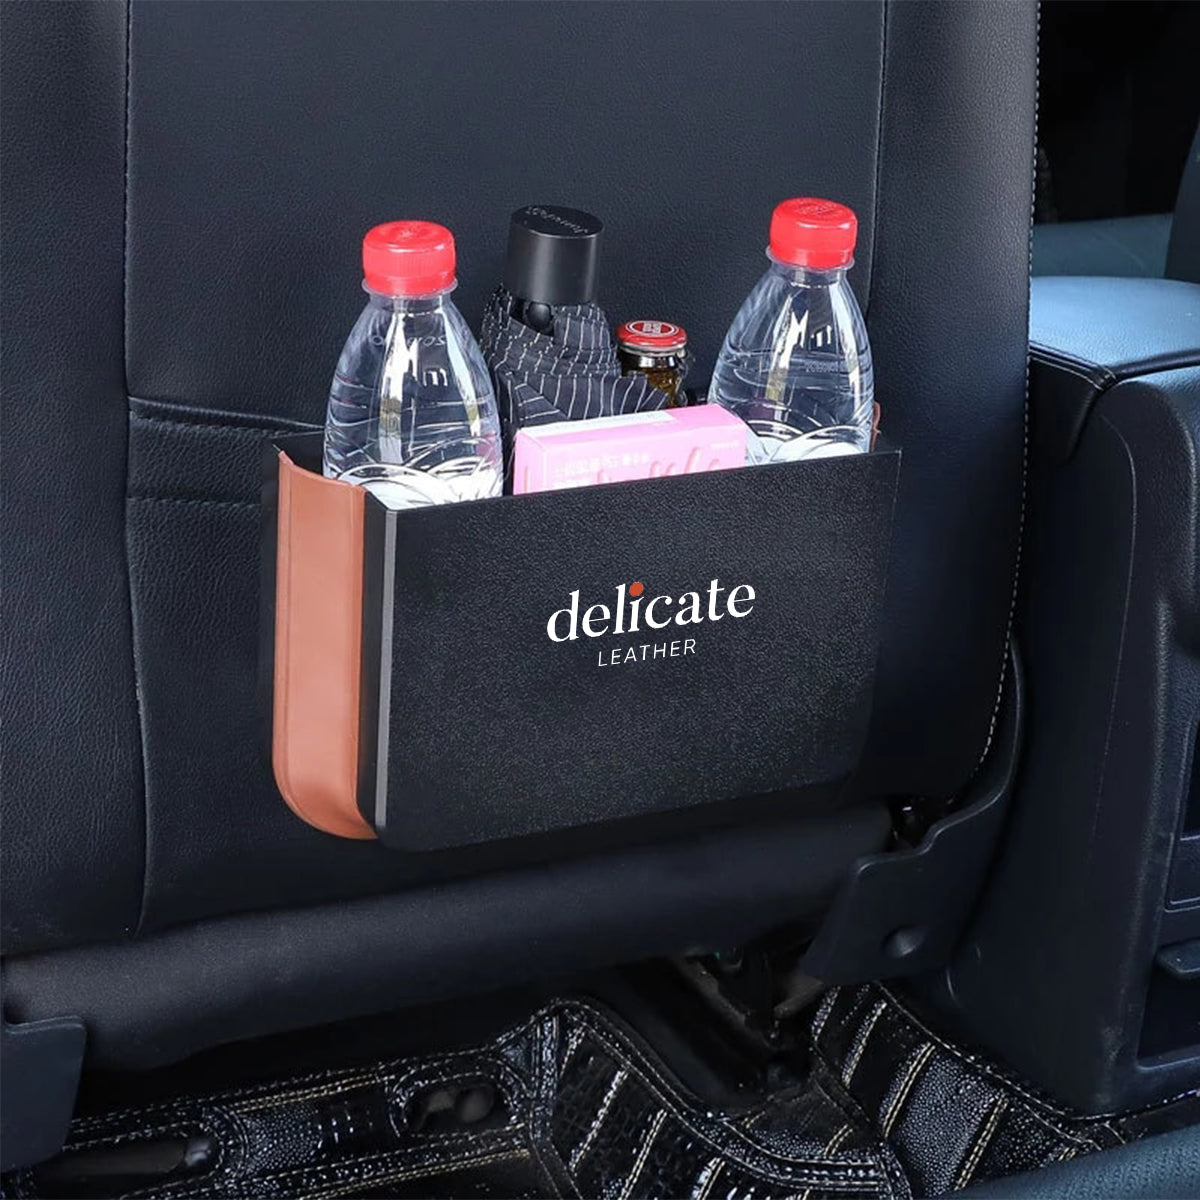 Delicate Leather Hanging Waterproof Car Trash can-Foldable, Custom For Your Cars, Waterproof, and Equipped with Cup Holders and Trays. Multi-Purpose, Car Accessories PE11992 - Delicate Leather